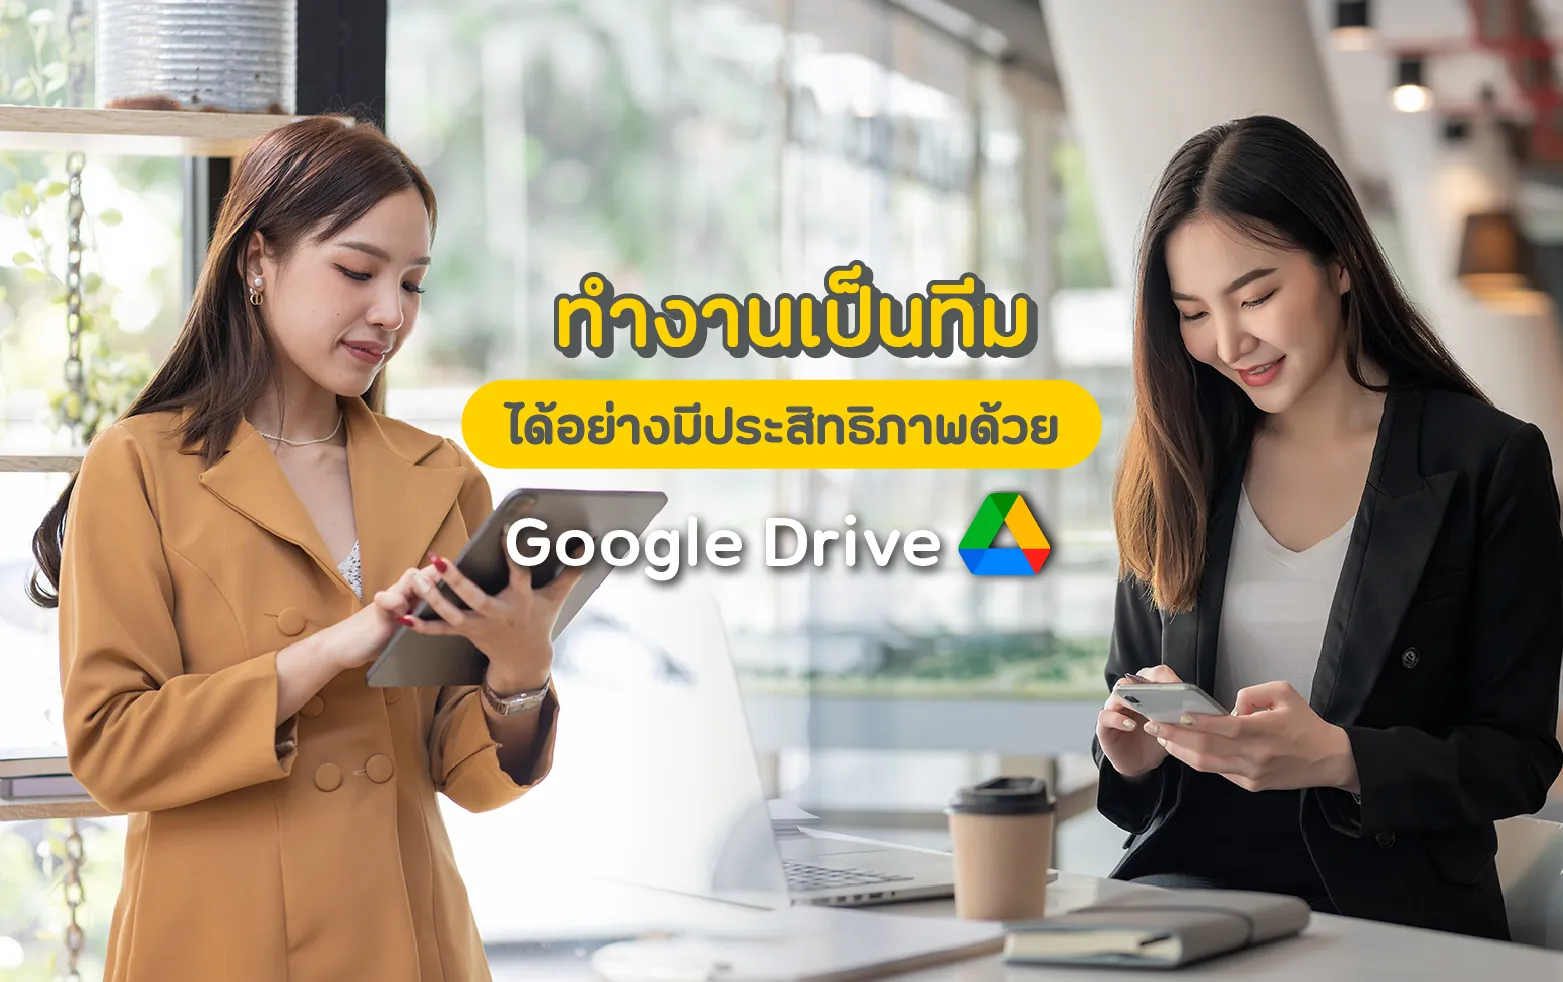 Work effectively as a team with Google Drive._Thumnail